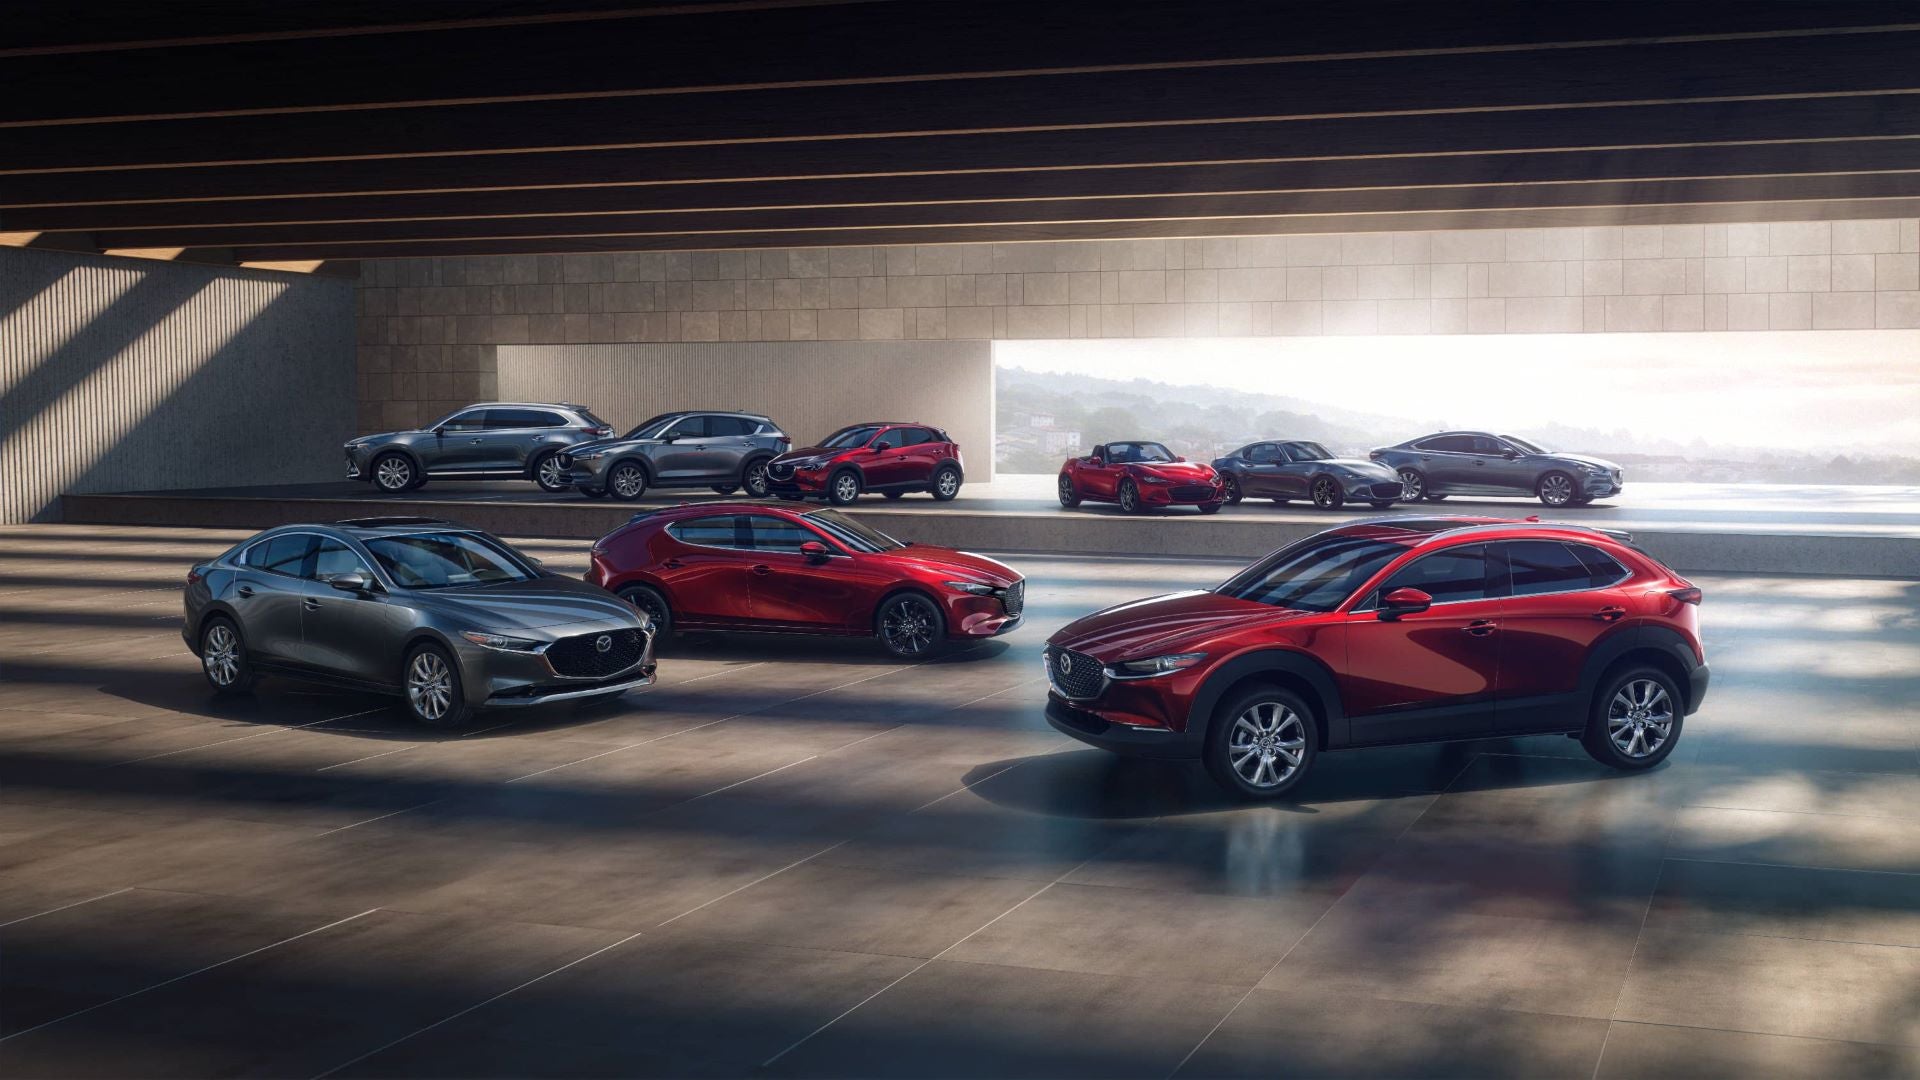 Certified Pre-Owned Mazda Vehicles